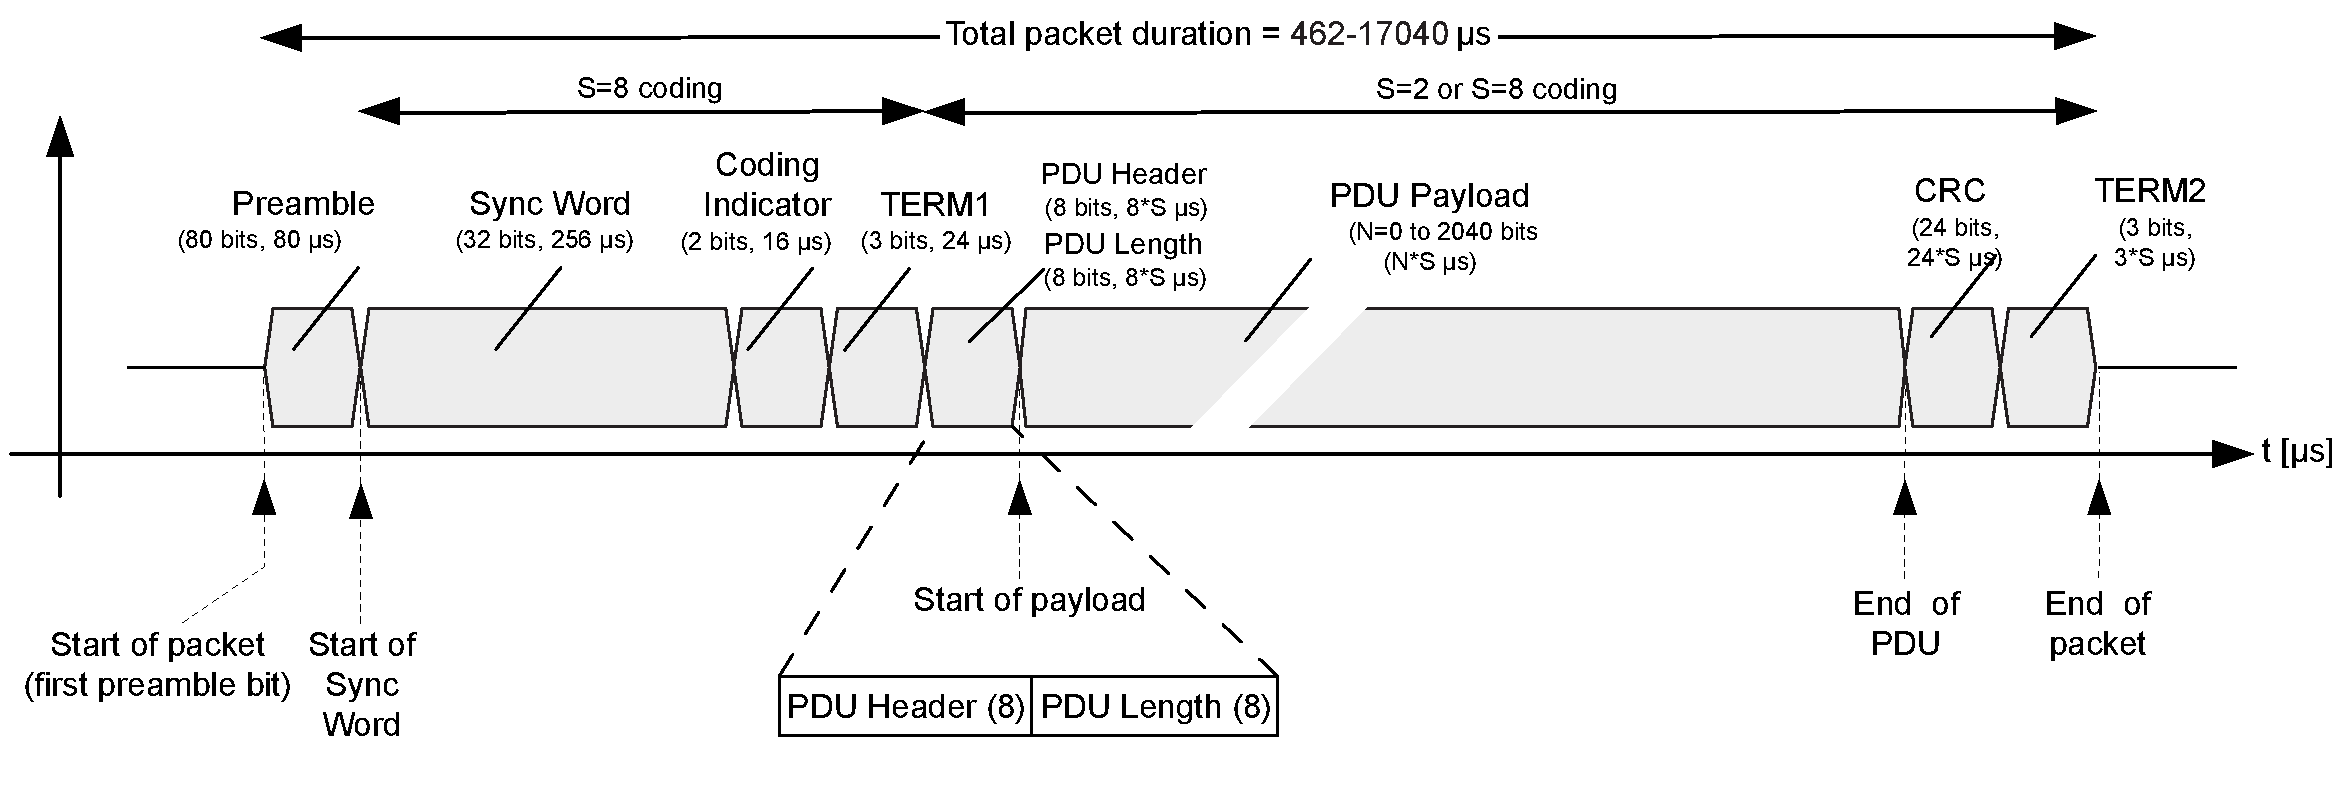 LE Test packet format for the LE Coded PHY